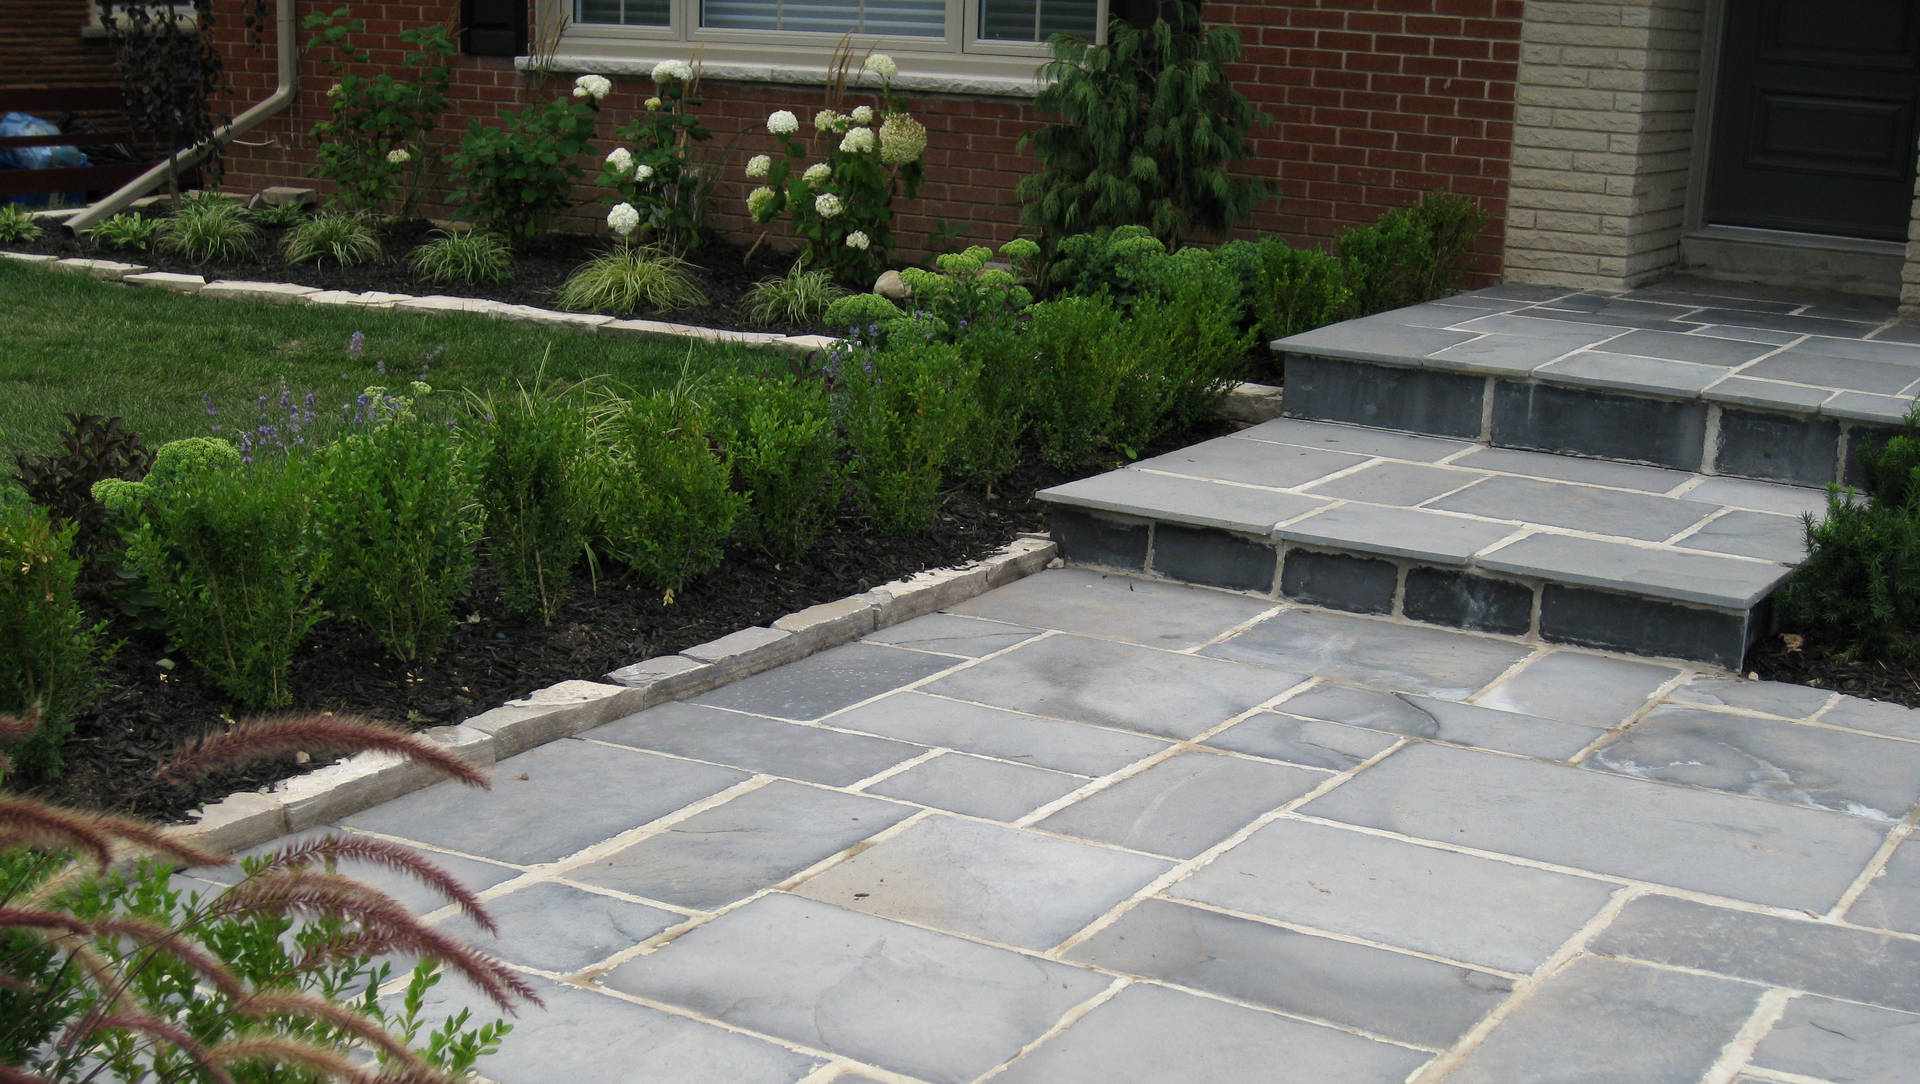 Stone steps and front yard landscaping. Modern landscaping / hardscaping project in London Ontario.